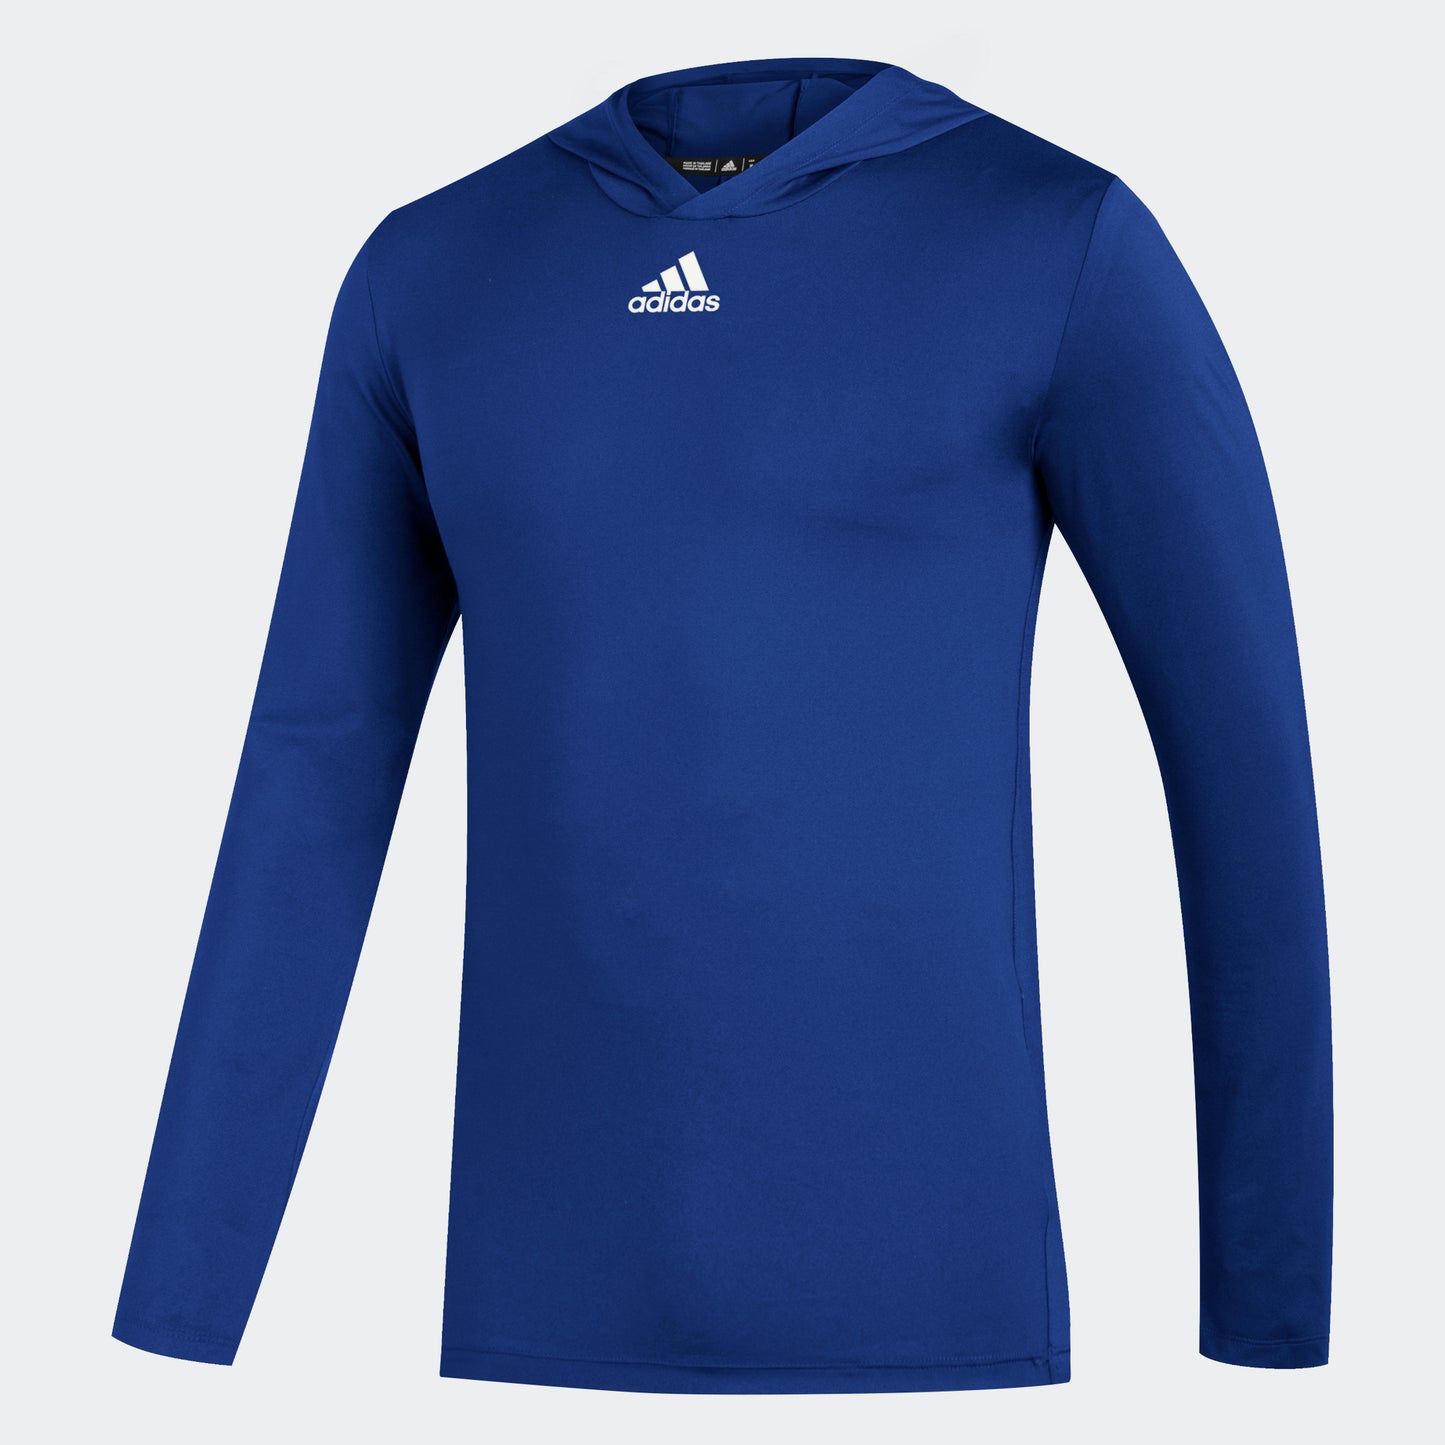 adidas UNDER THE LIGHTS Hooded Training Top | Royal Blue | Men's